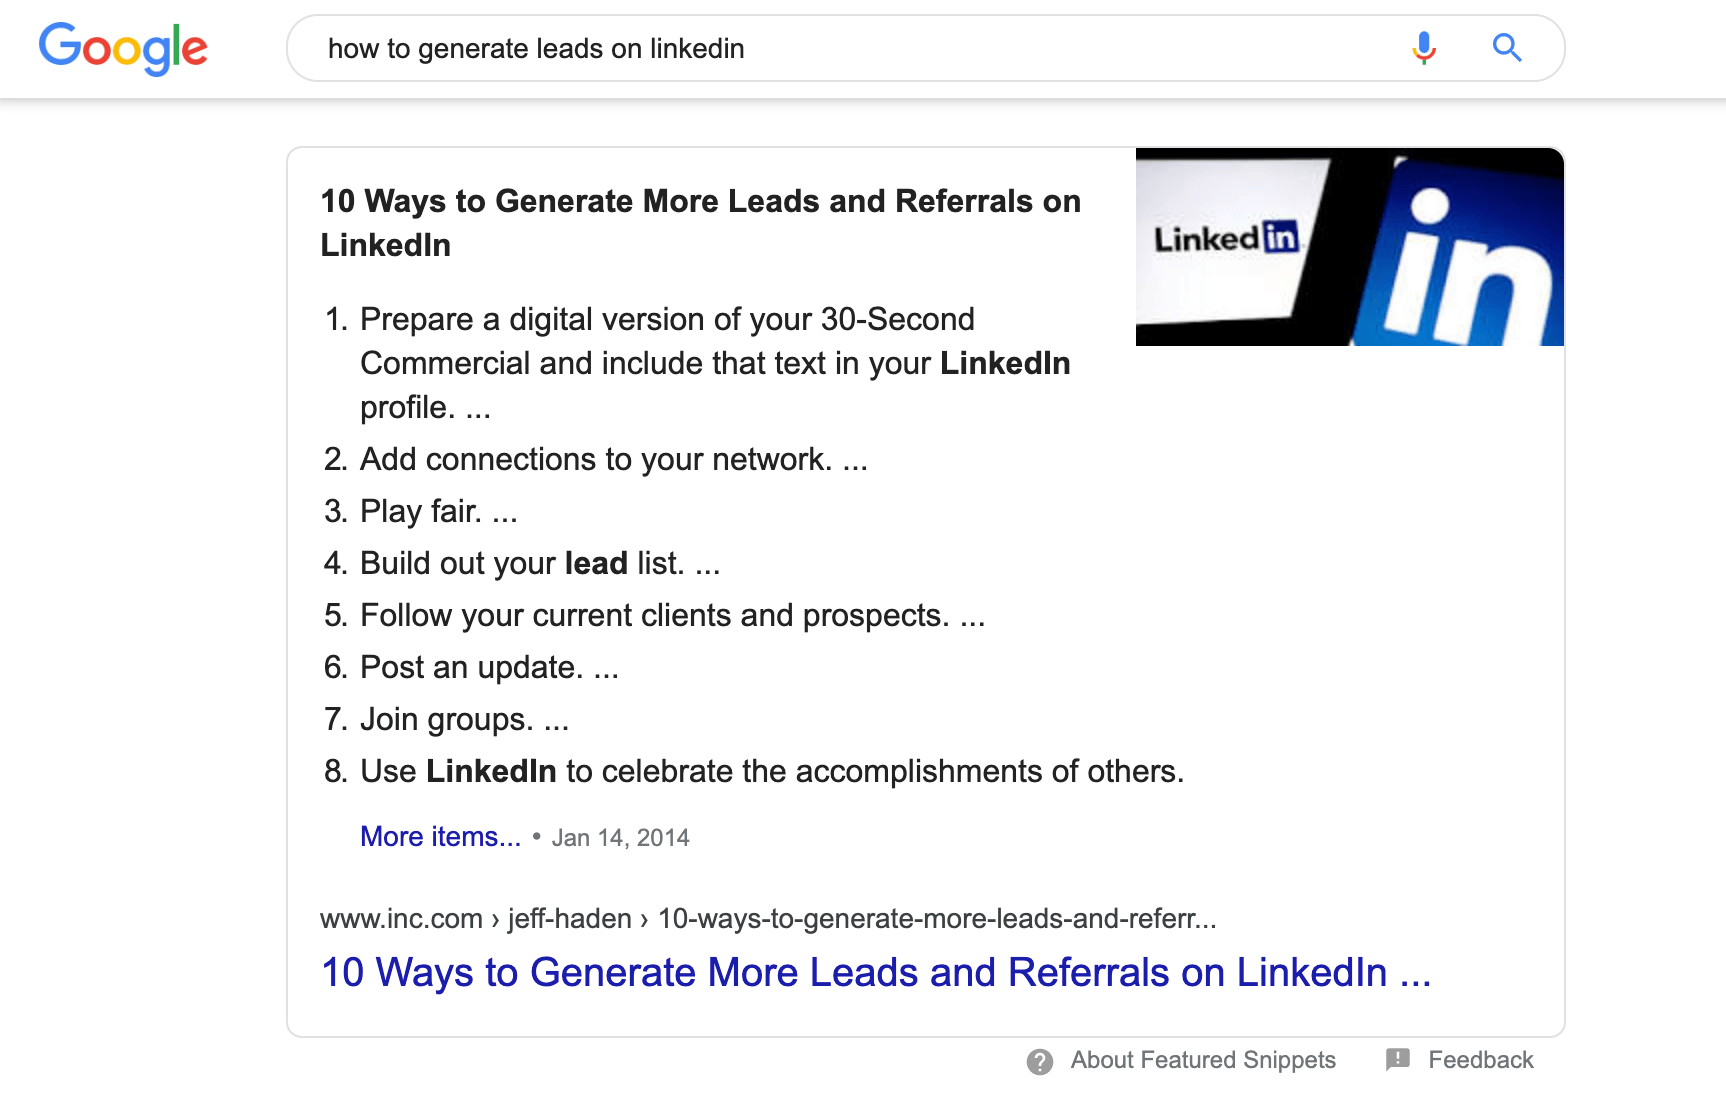 How to generate leads on LinkedIn 